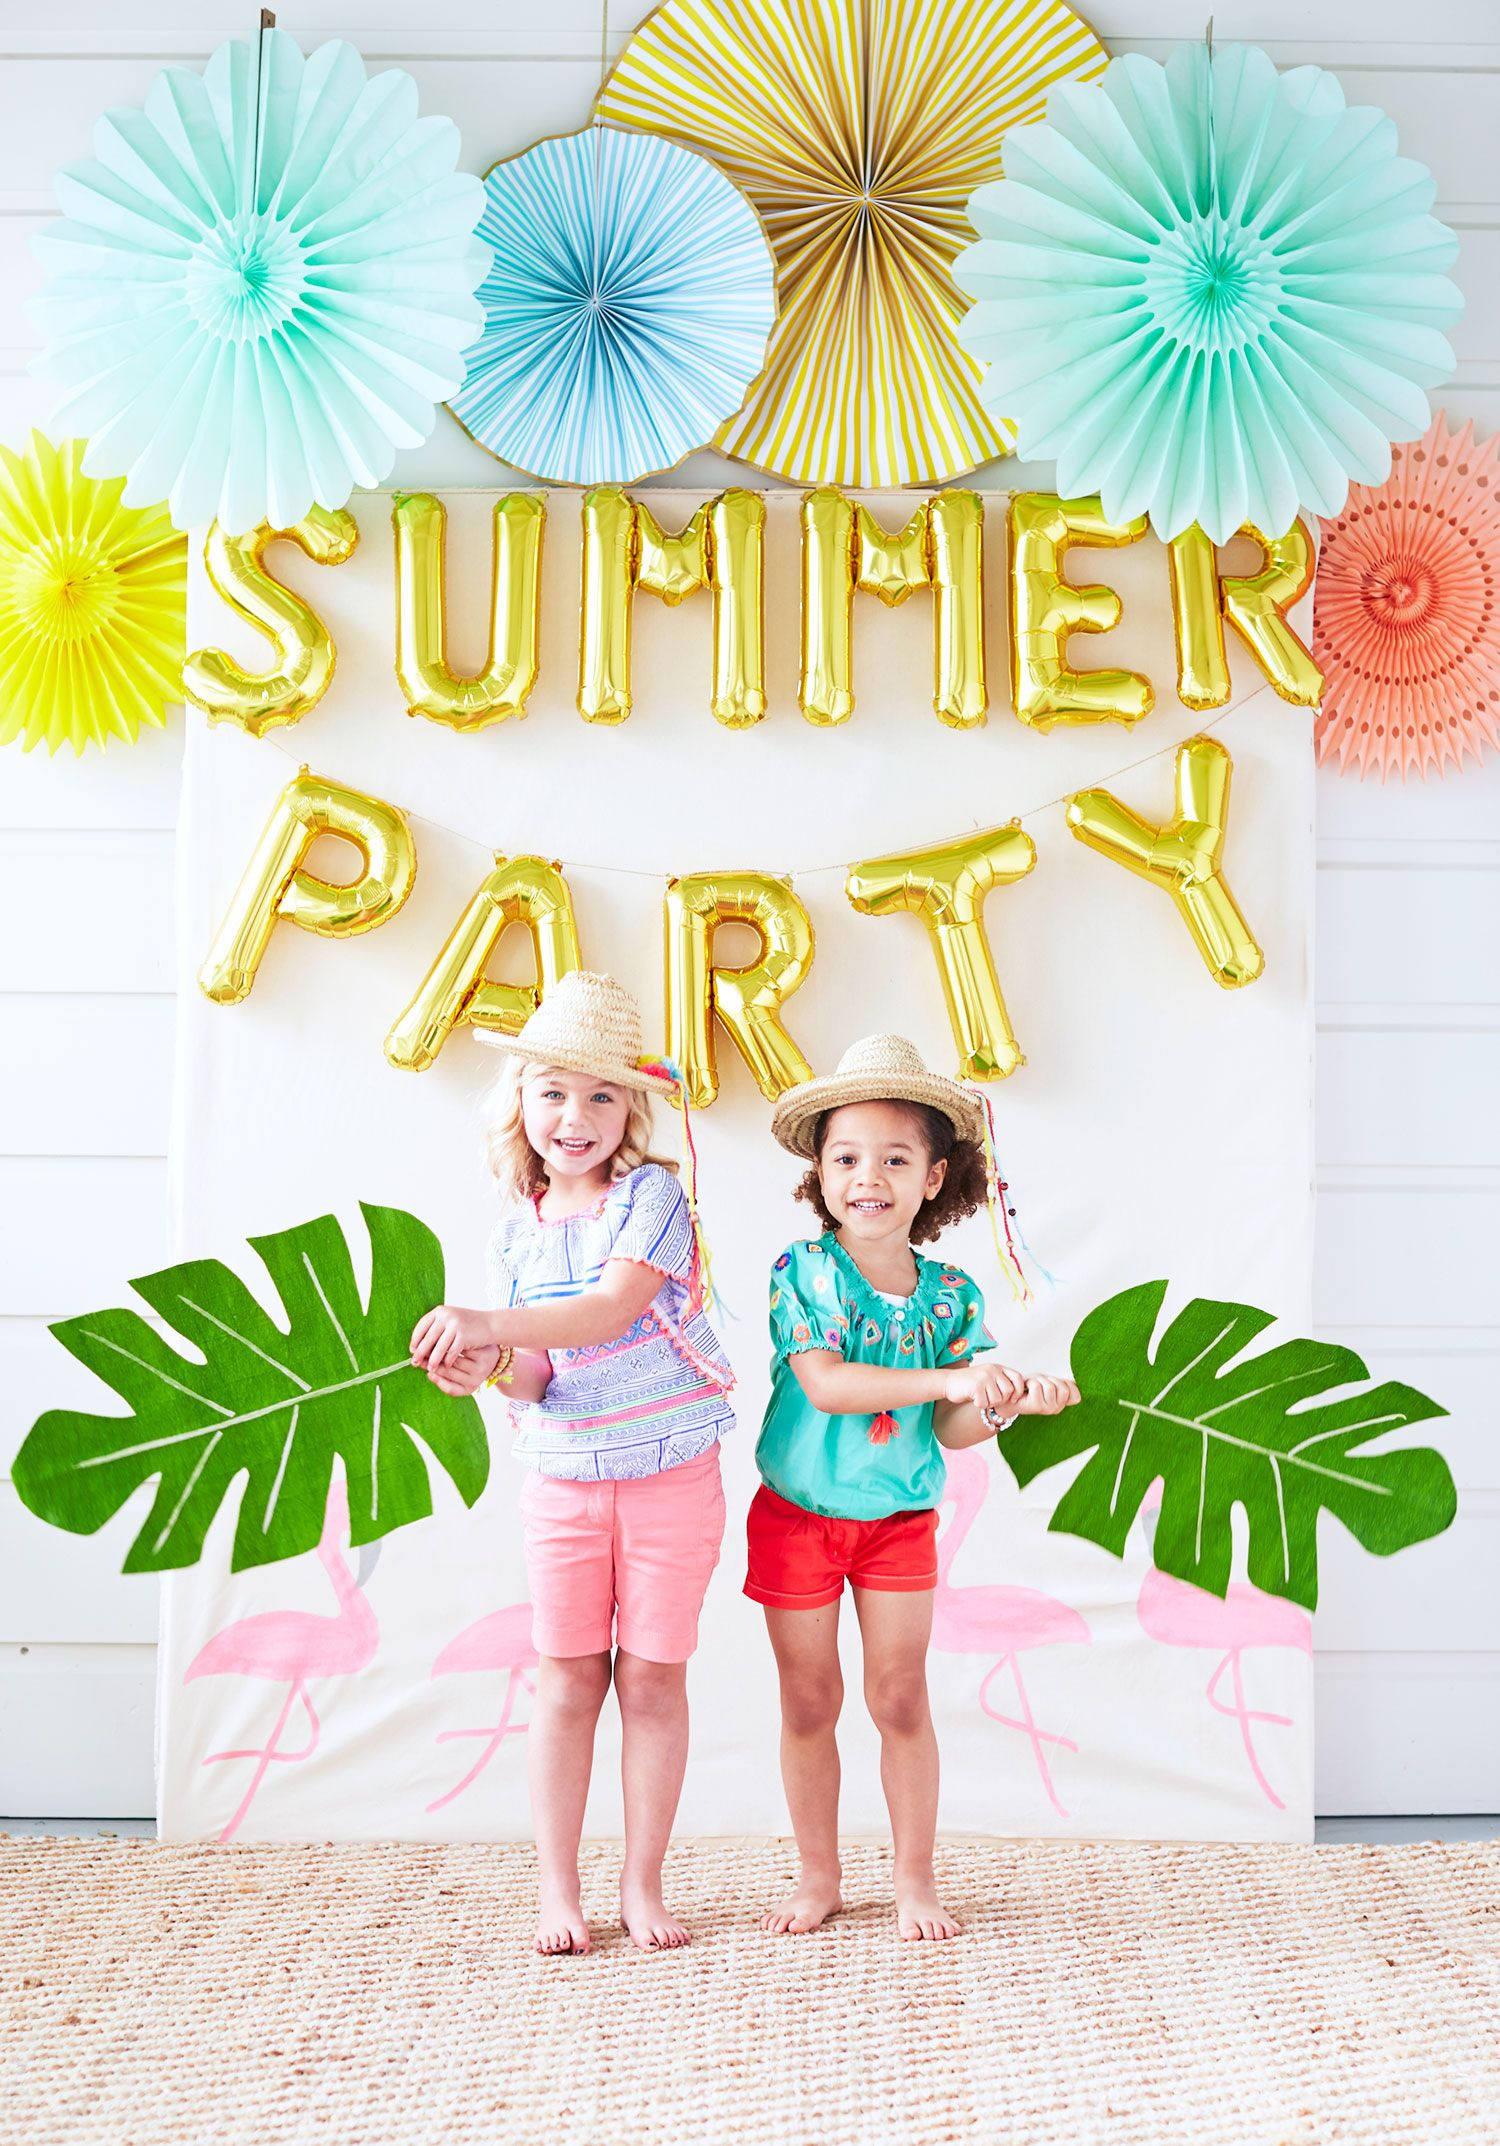 Party Theme Ideas For Summer
 Summer Party Decoration Ideas We Love on Love the Day